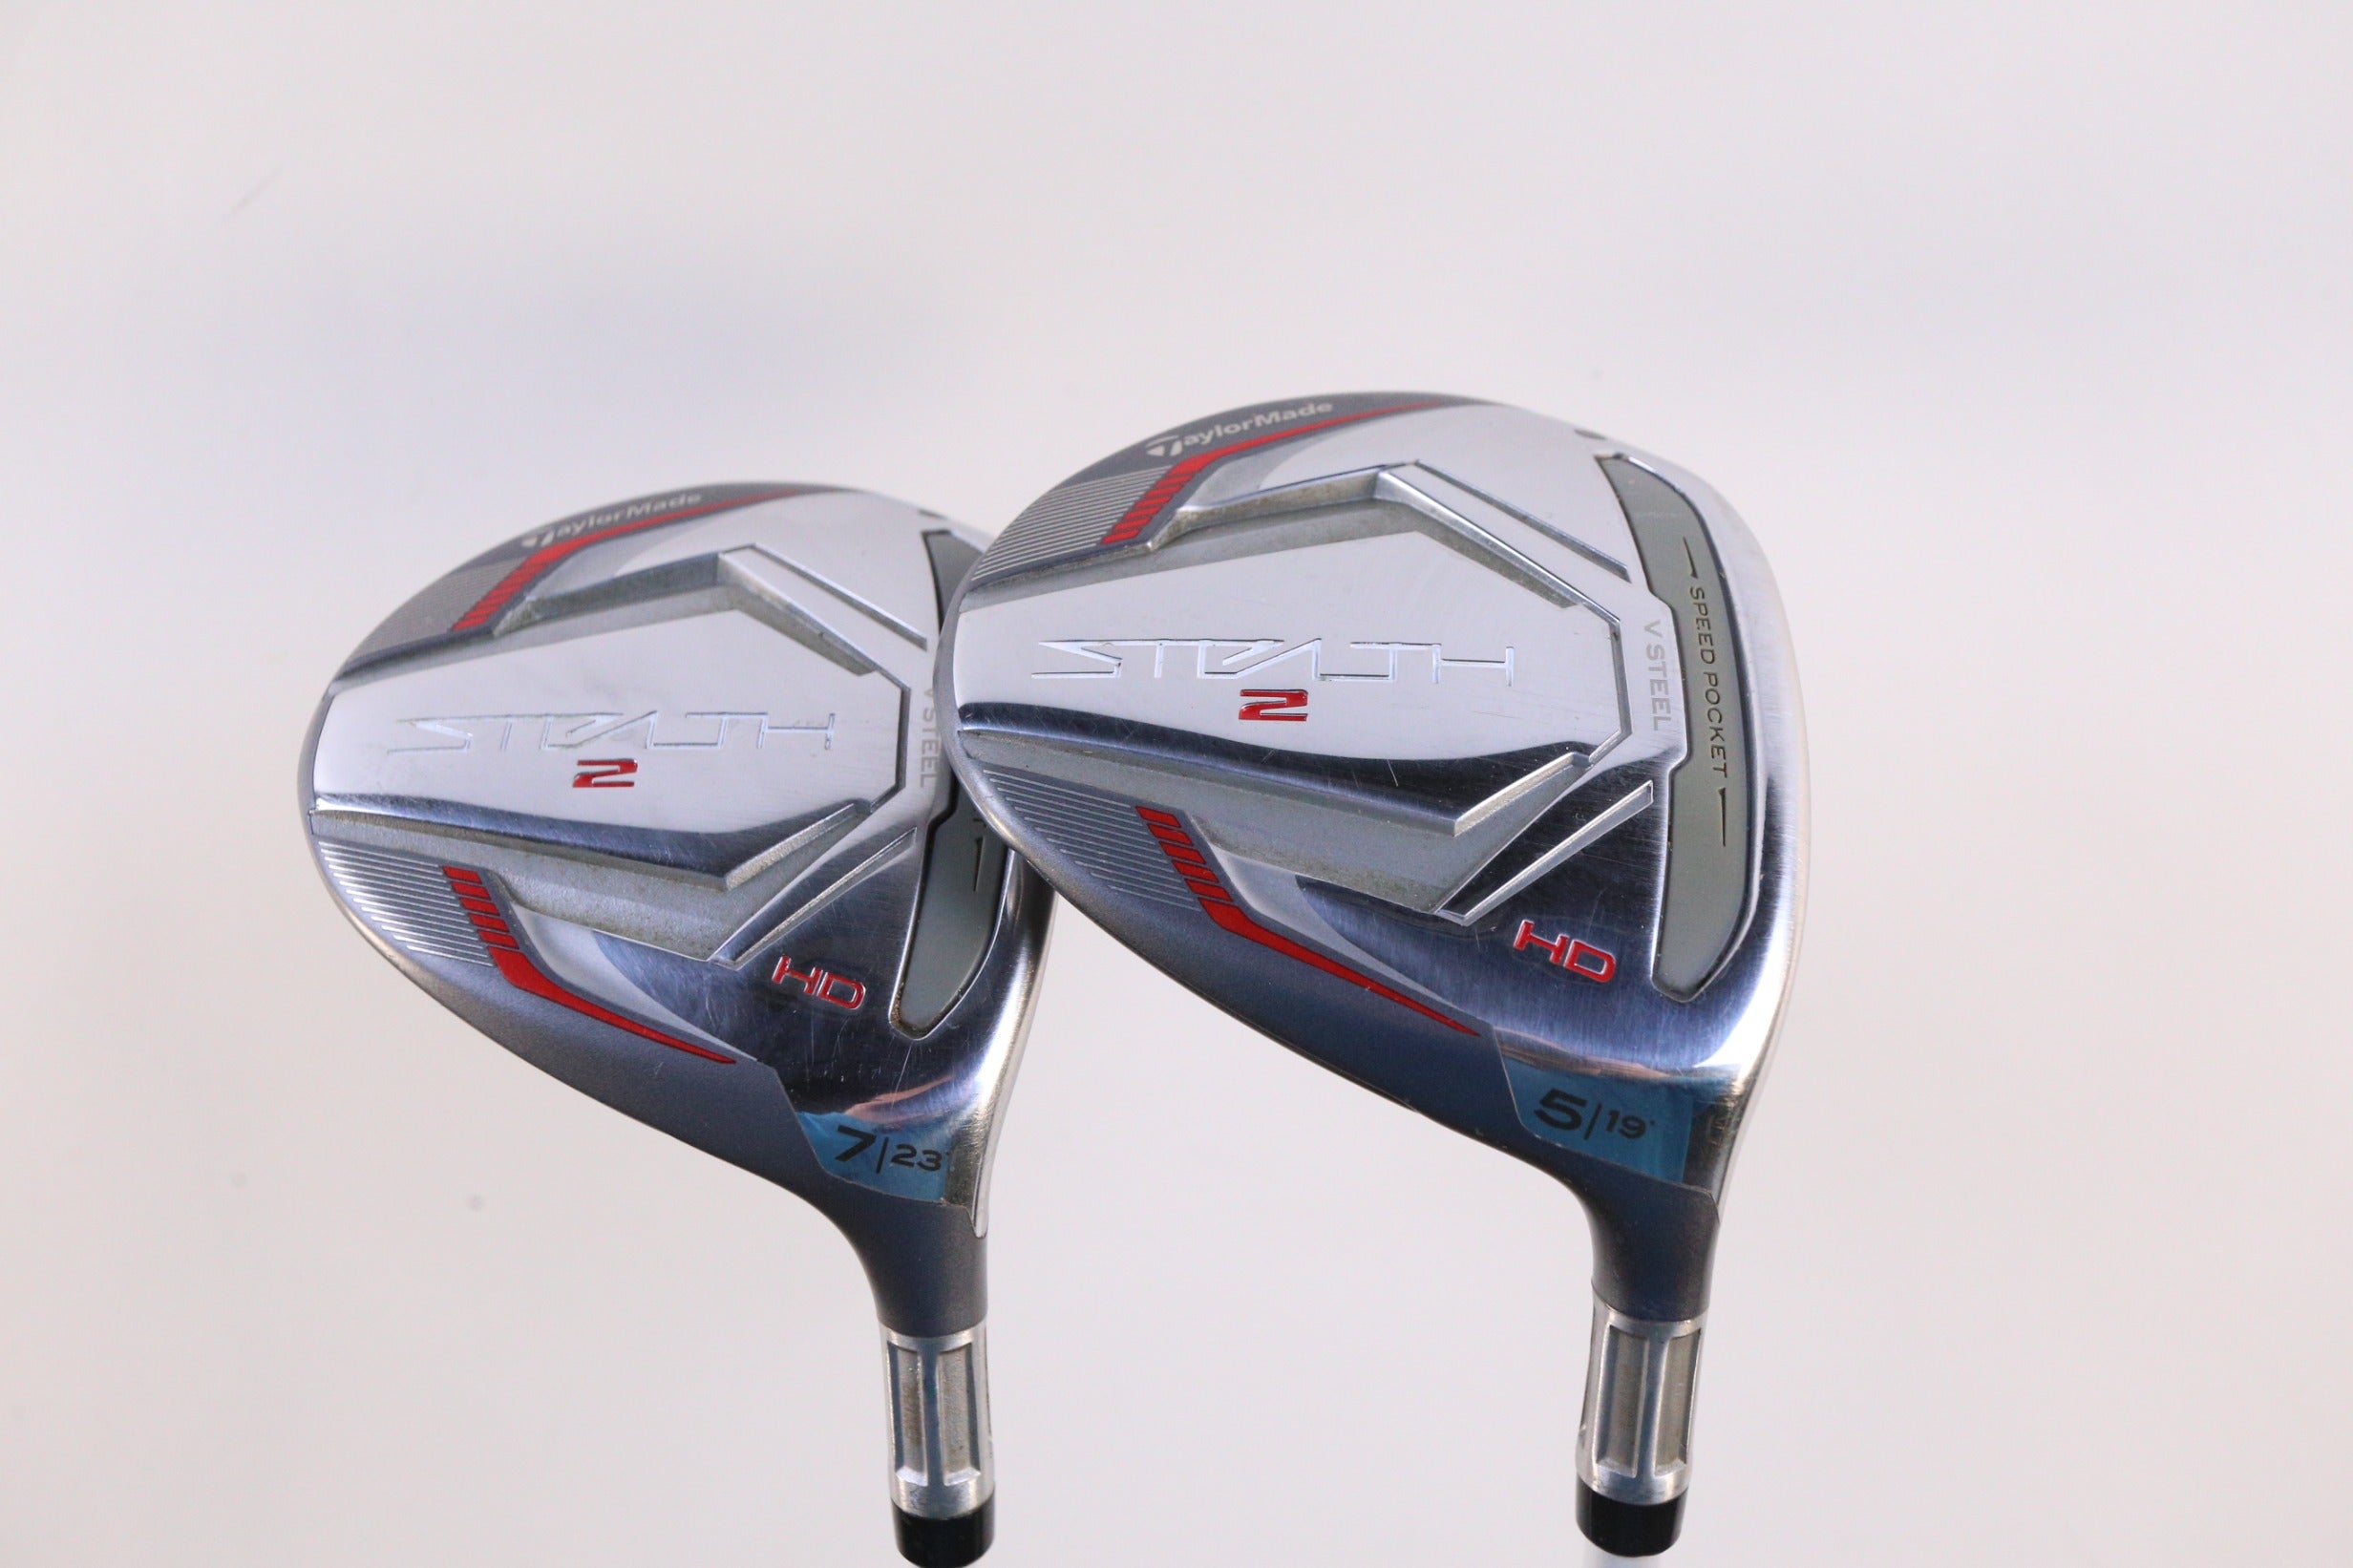 Used TaylorMade STEALTH 2 HD Wood Set - Right-Handed - 5W, 7W - Ladies Flex